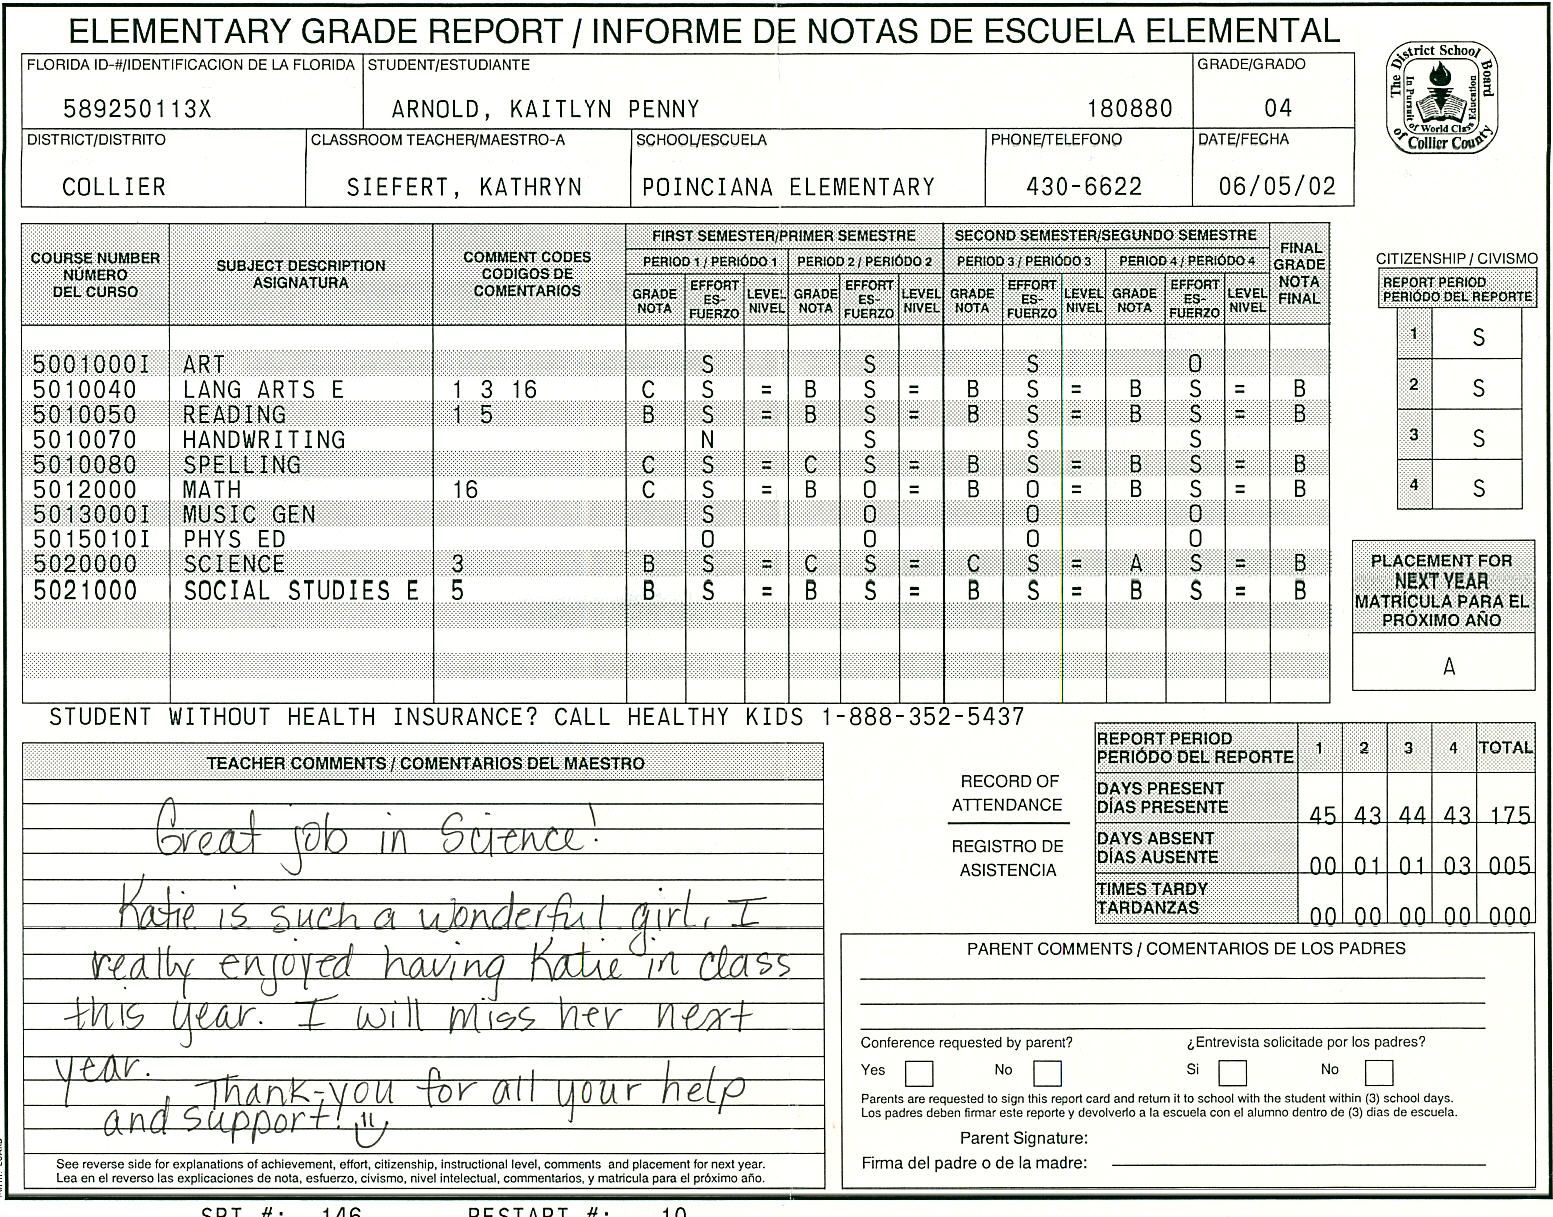 Elementary School Report Card Template | Homeschooling Intended For Homeschool Middle School Report Card Template